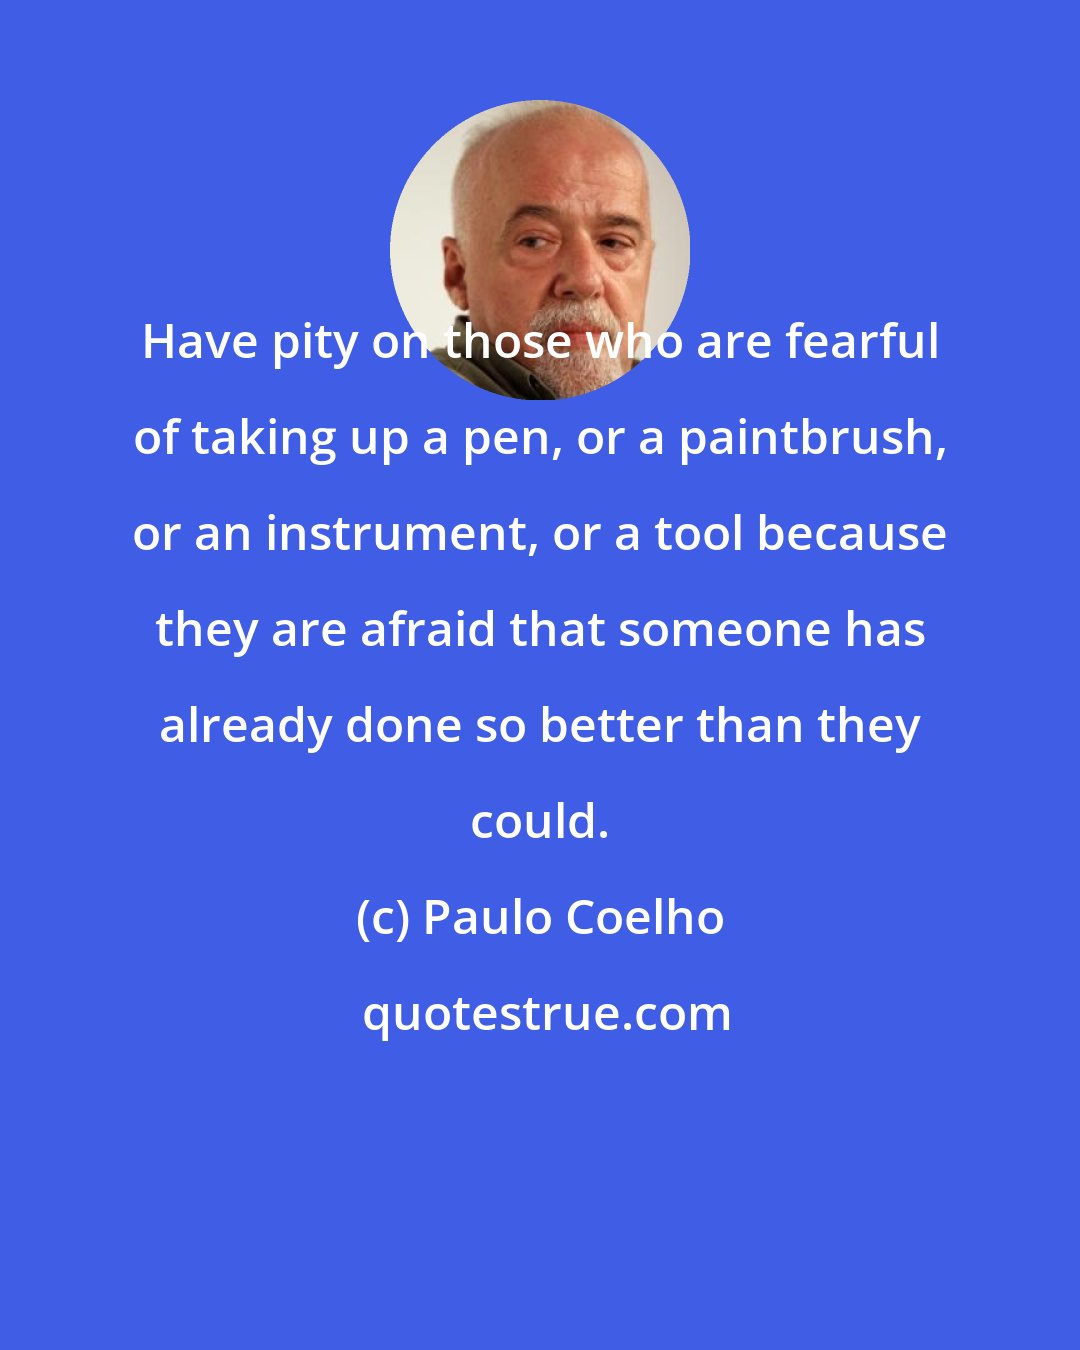 Paulo Coelho: Have pity on those who are fearful of taking up a pen, or a paintbrush, or an instrument, or a tool because they are afraid that someone has already done so better than they could.